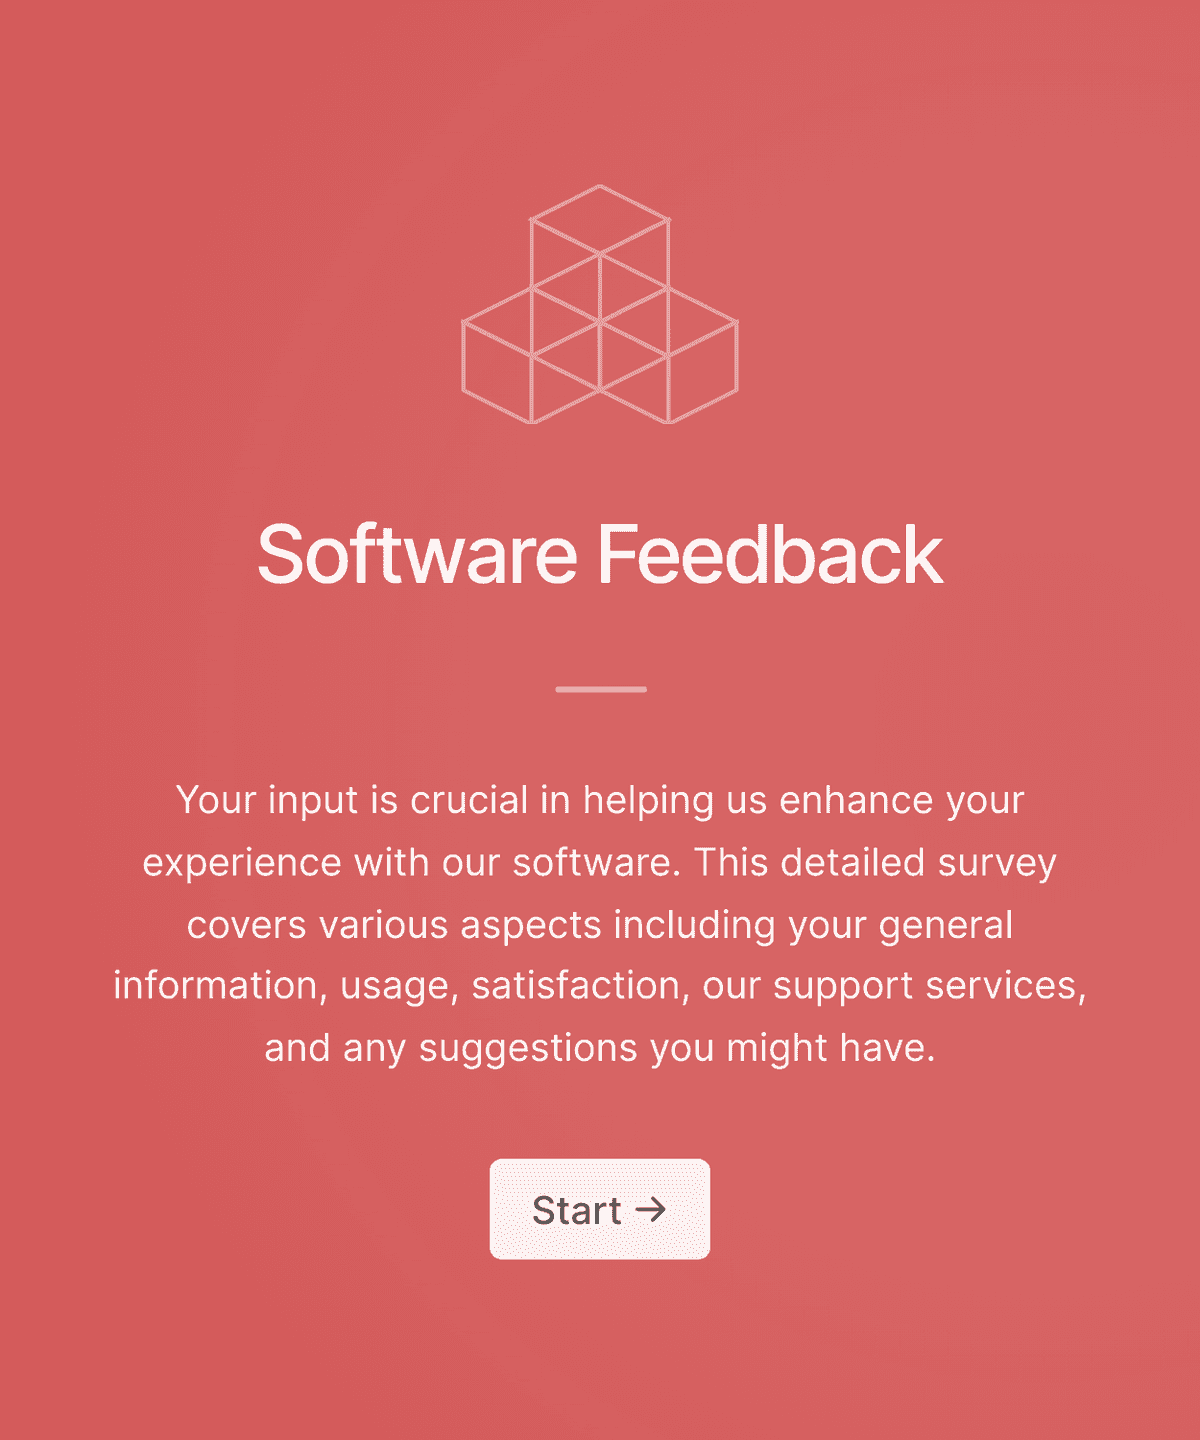 Welcome step of 'Software feedback survey' with an illustration, introduction text, and a 'Start' button